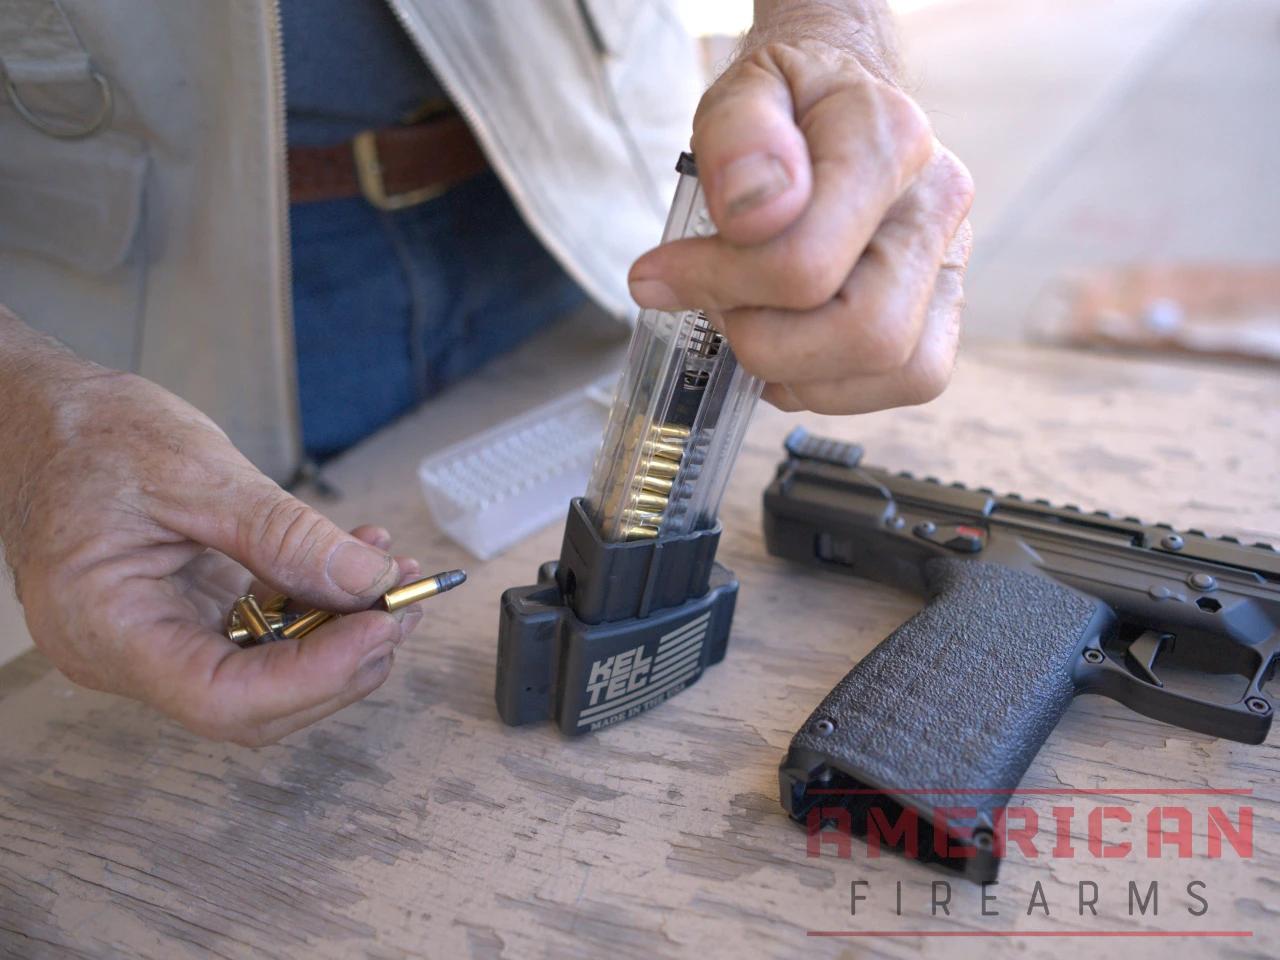 Loading the 33-round magazine is much improved with the use of KelTec's speed loader.